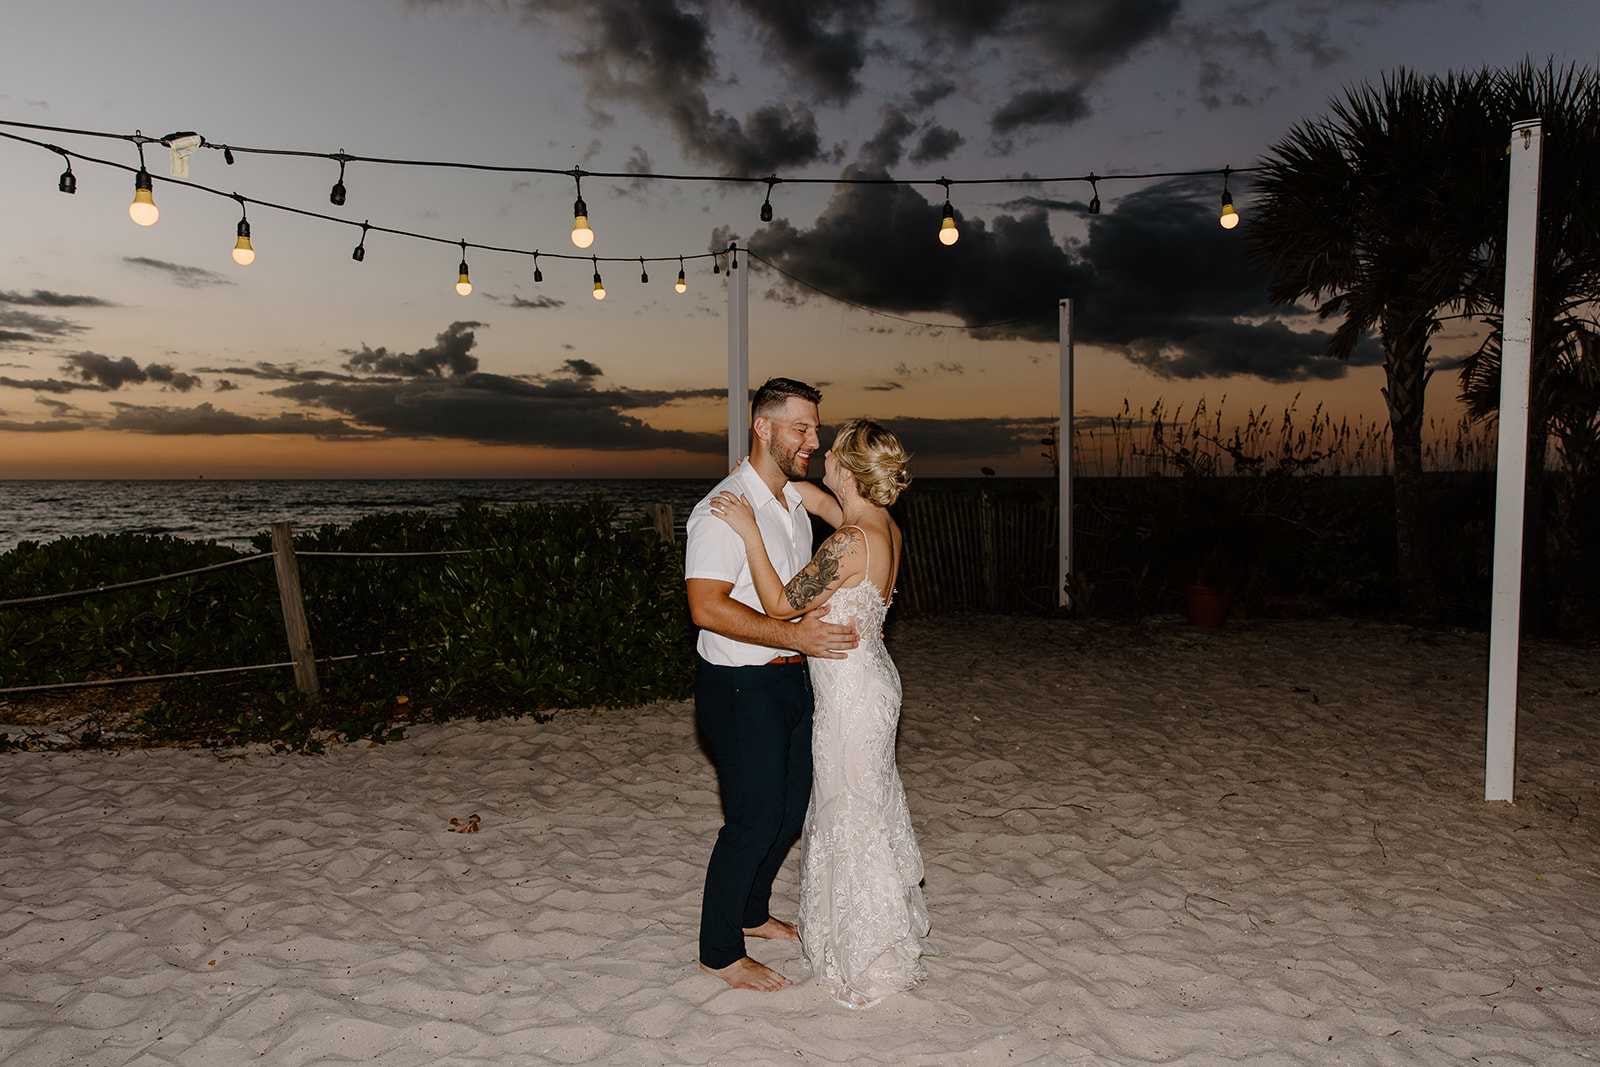 Bride and groom dance as the sun sets over the ocean